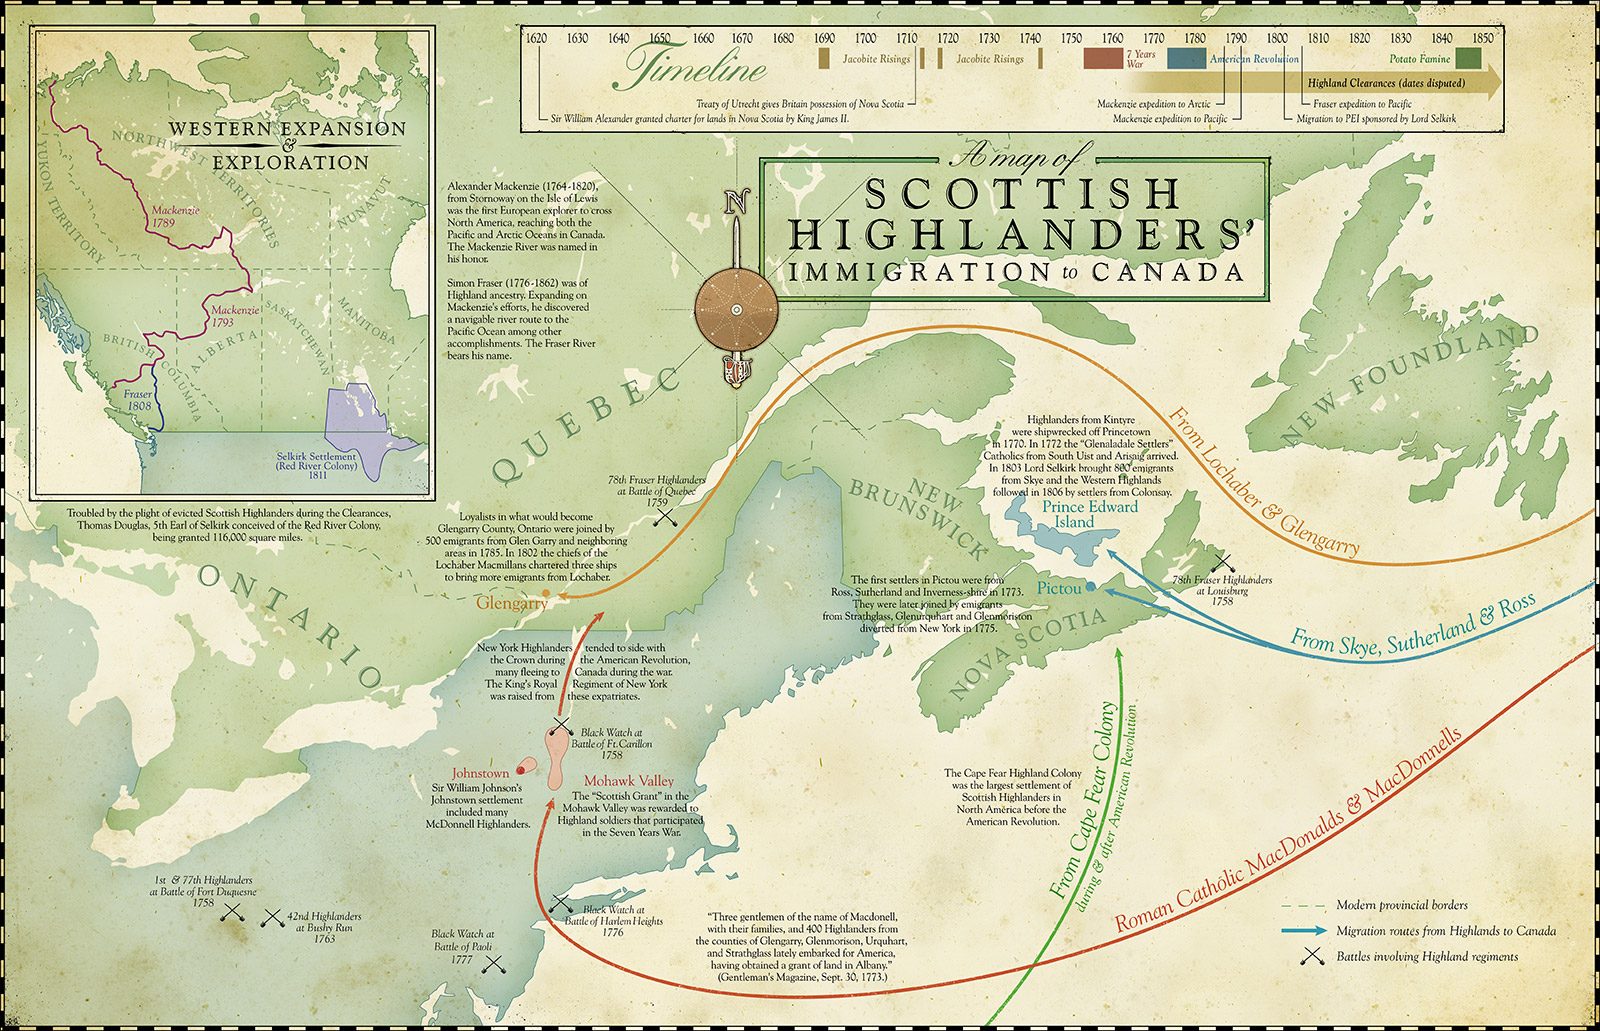 Map and timeline of Scottish Highland migrations to Canada